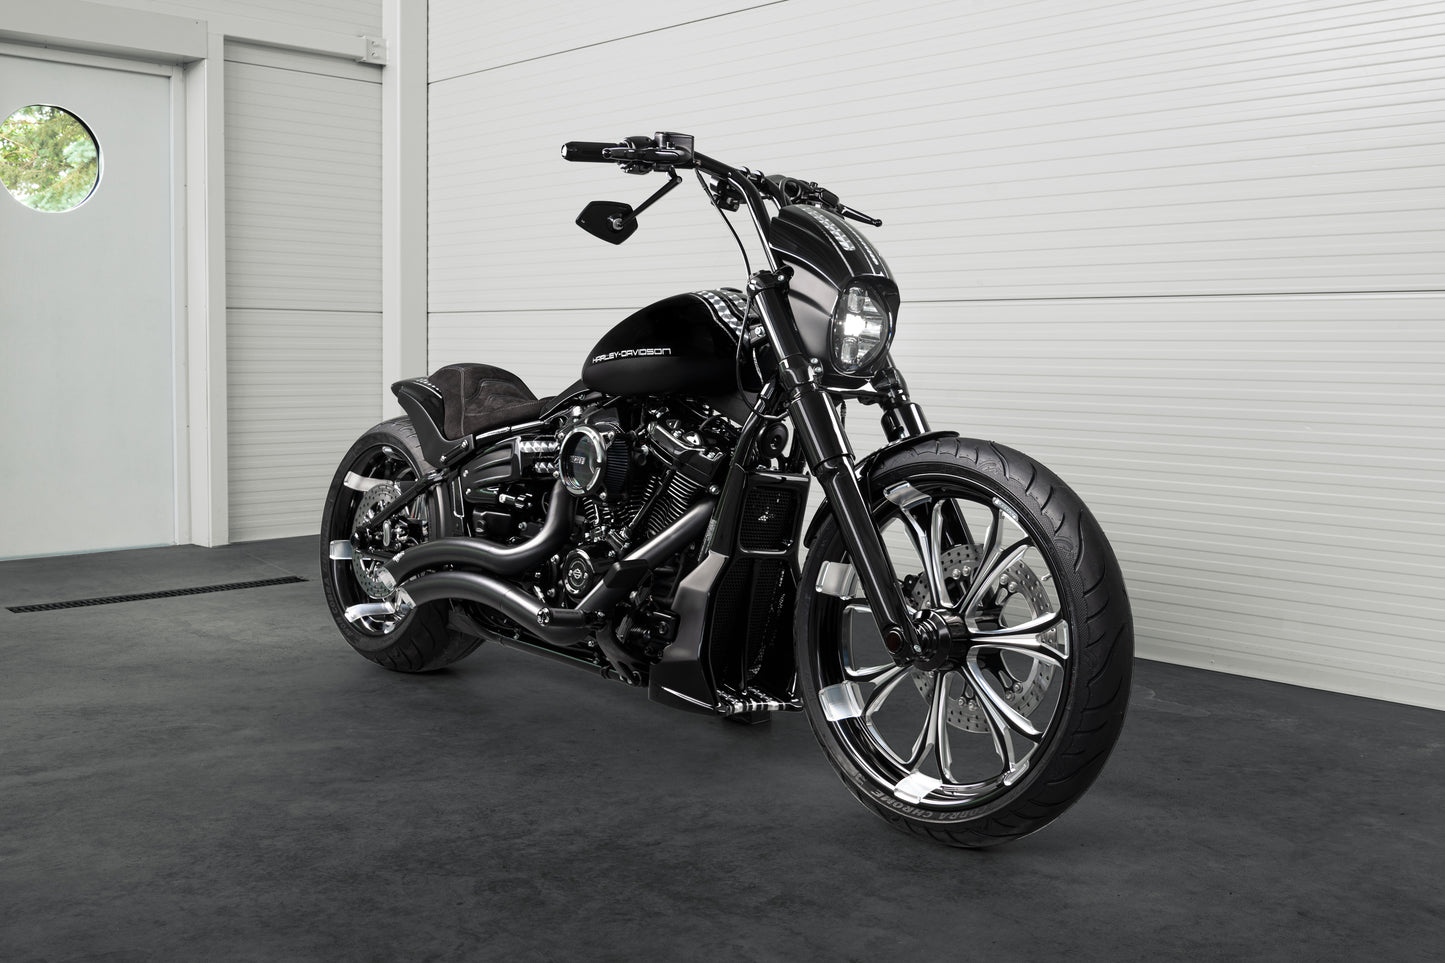 Harley Davidson motorcycle with Killer Custom "Race" mirrors from the side in a white modern garage